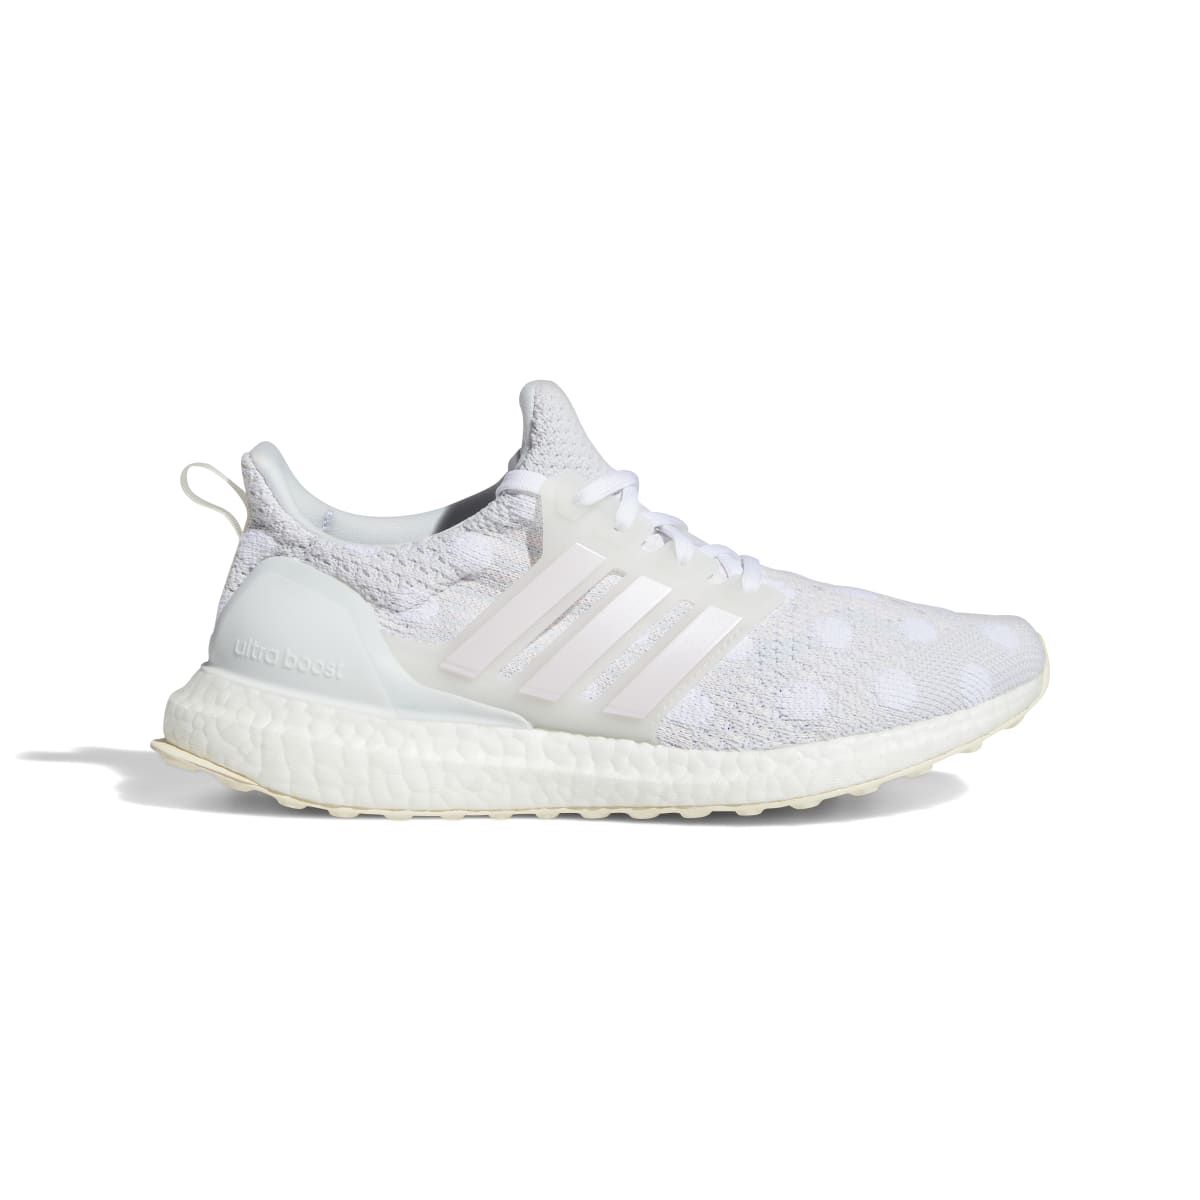 Ultraboost 5.0 DNA Trainers